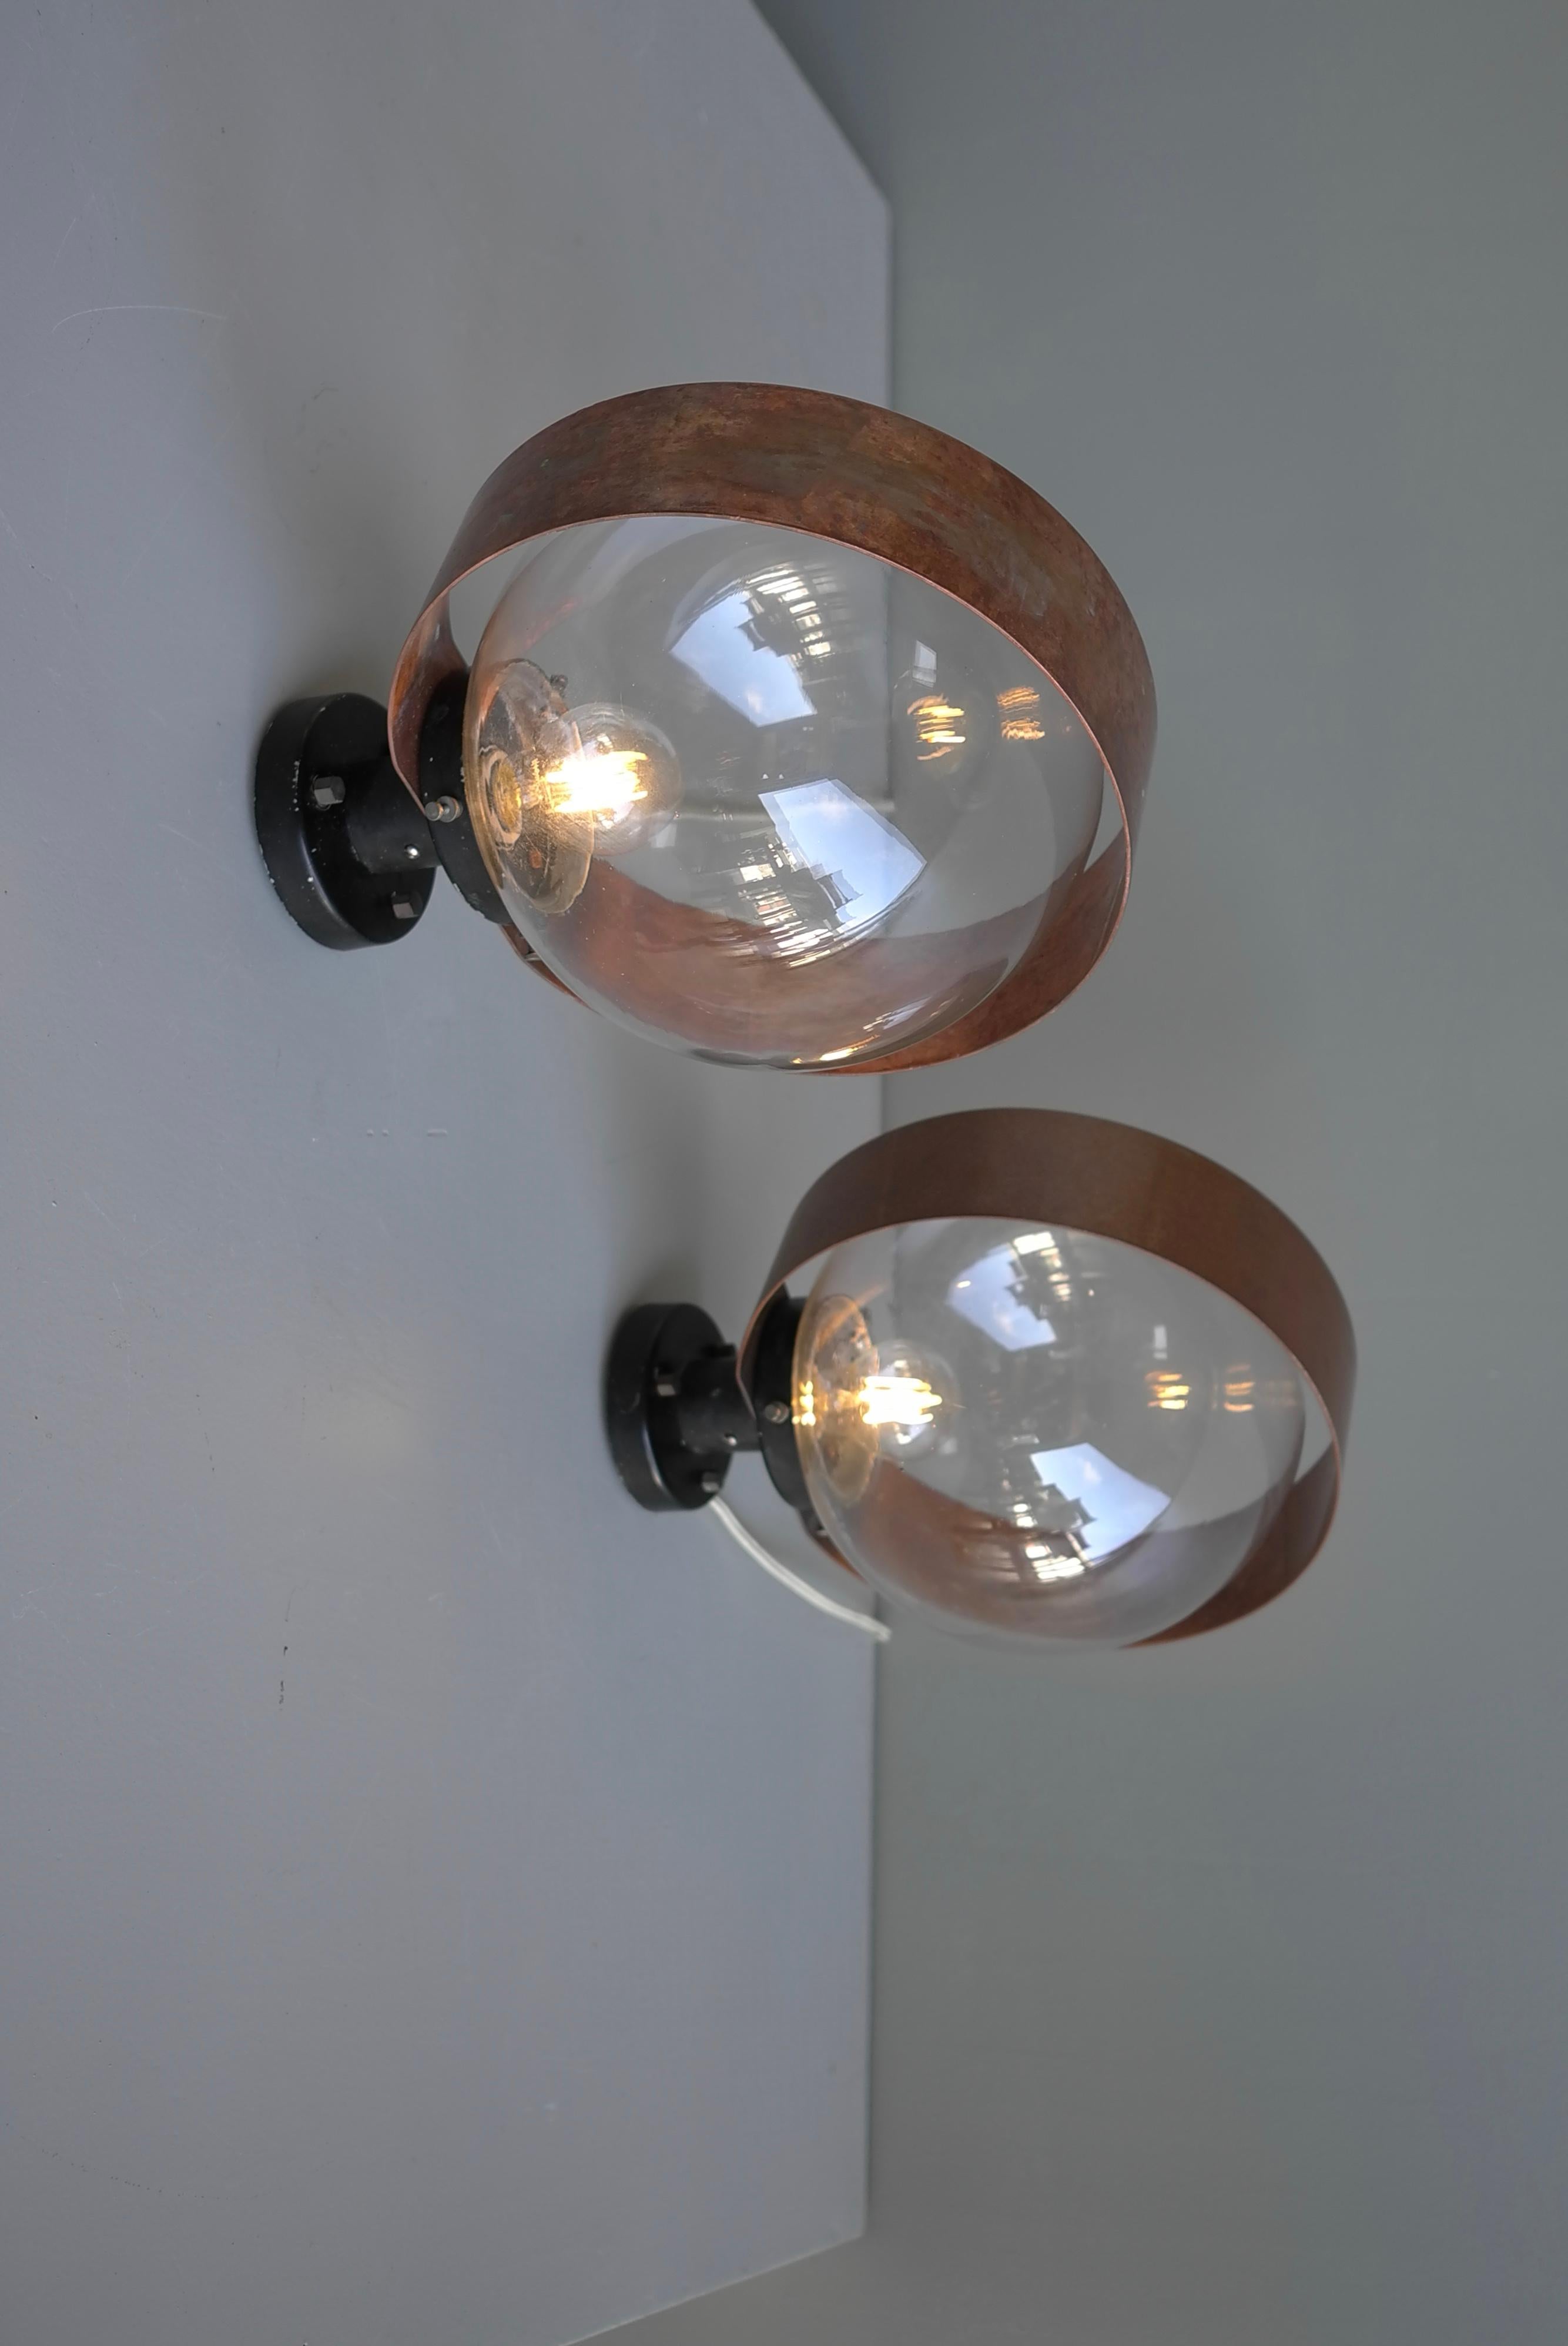 Pair of Scandinavian Glass Ball Wall lamps with Copper Patina Rims, 1960's For Sale 8